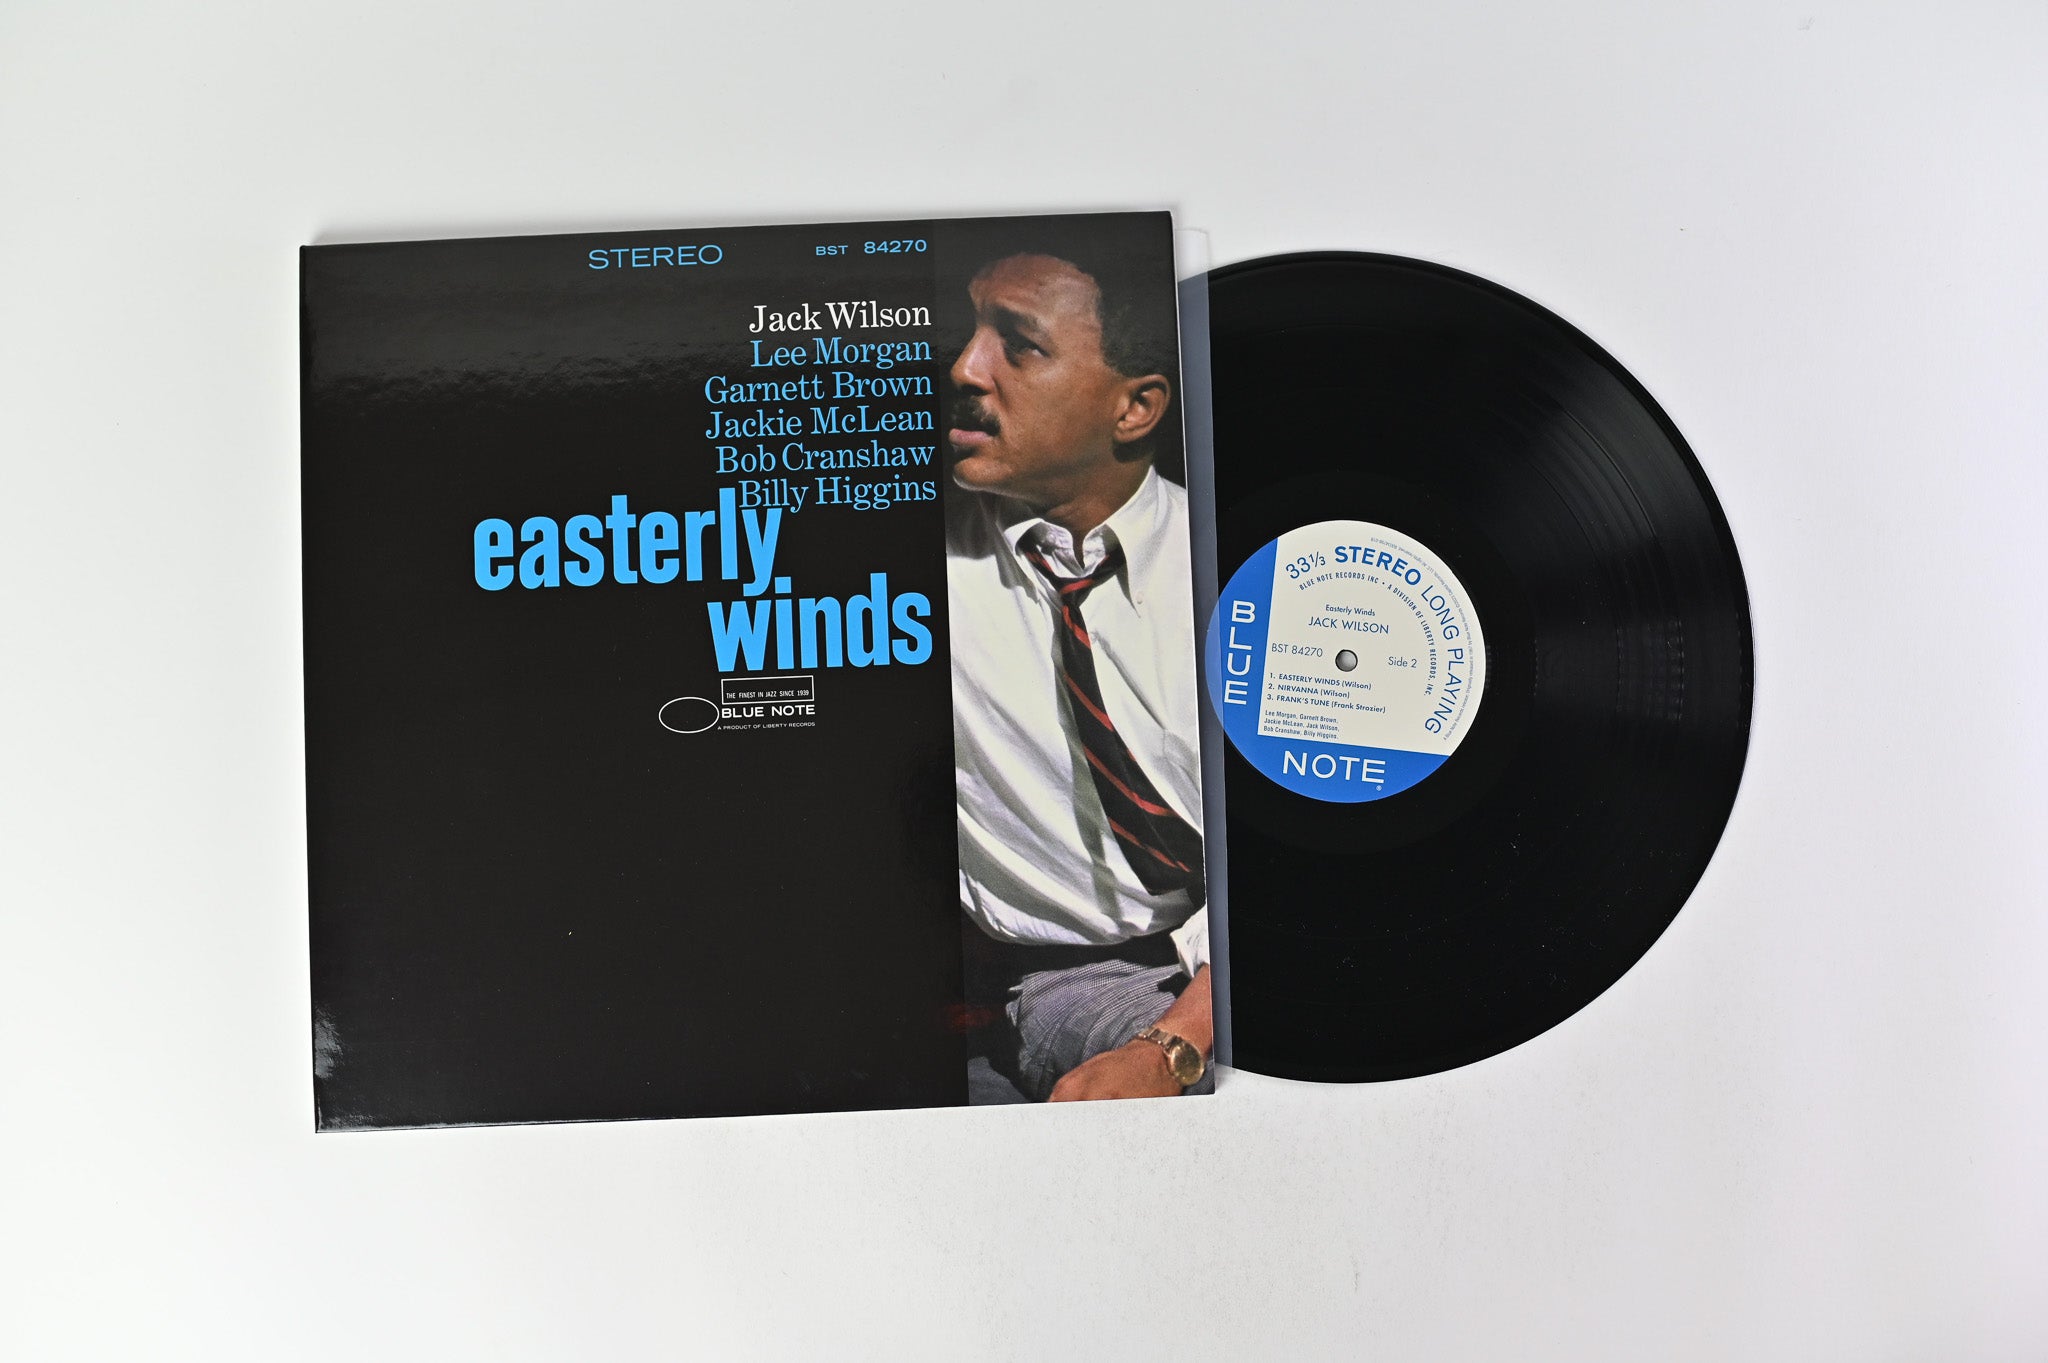 Jack Wilson - Easterly Winds on Blue Note Tone Poet Series